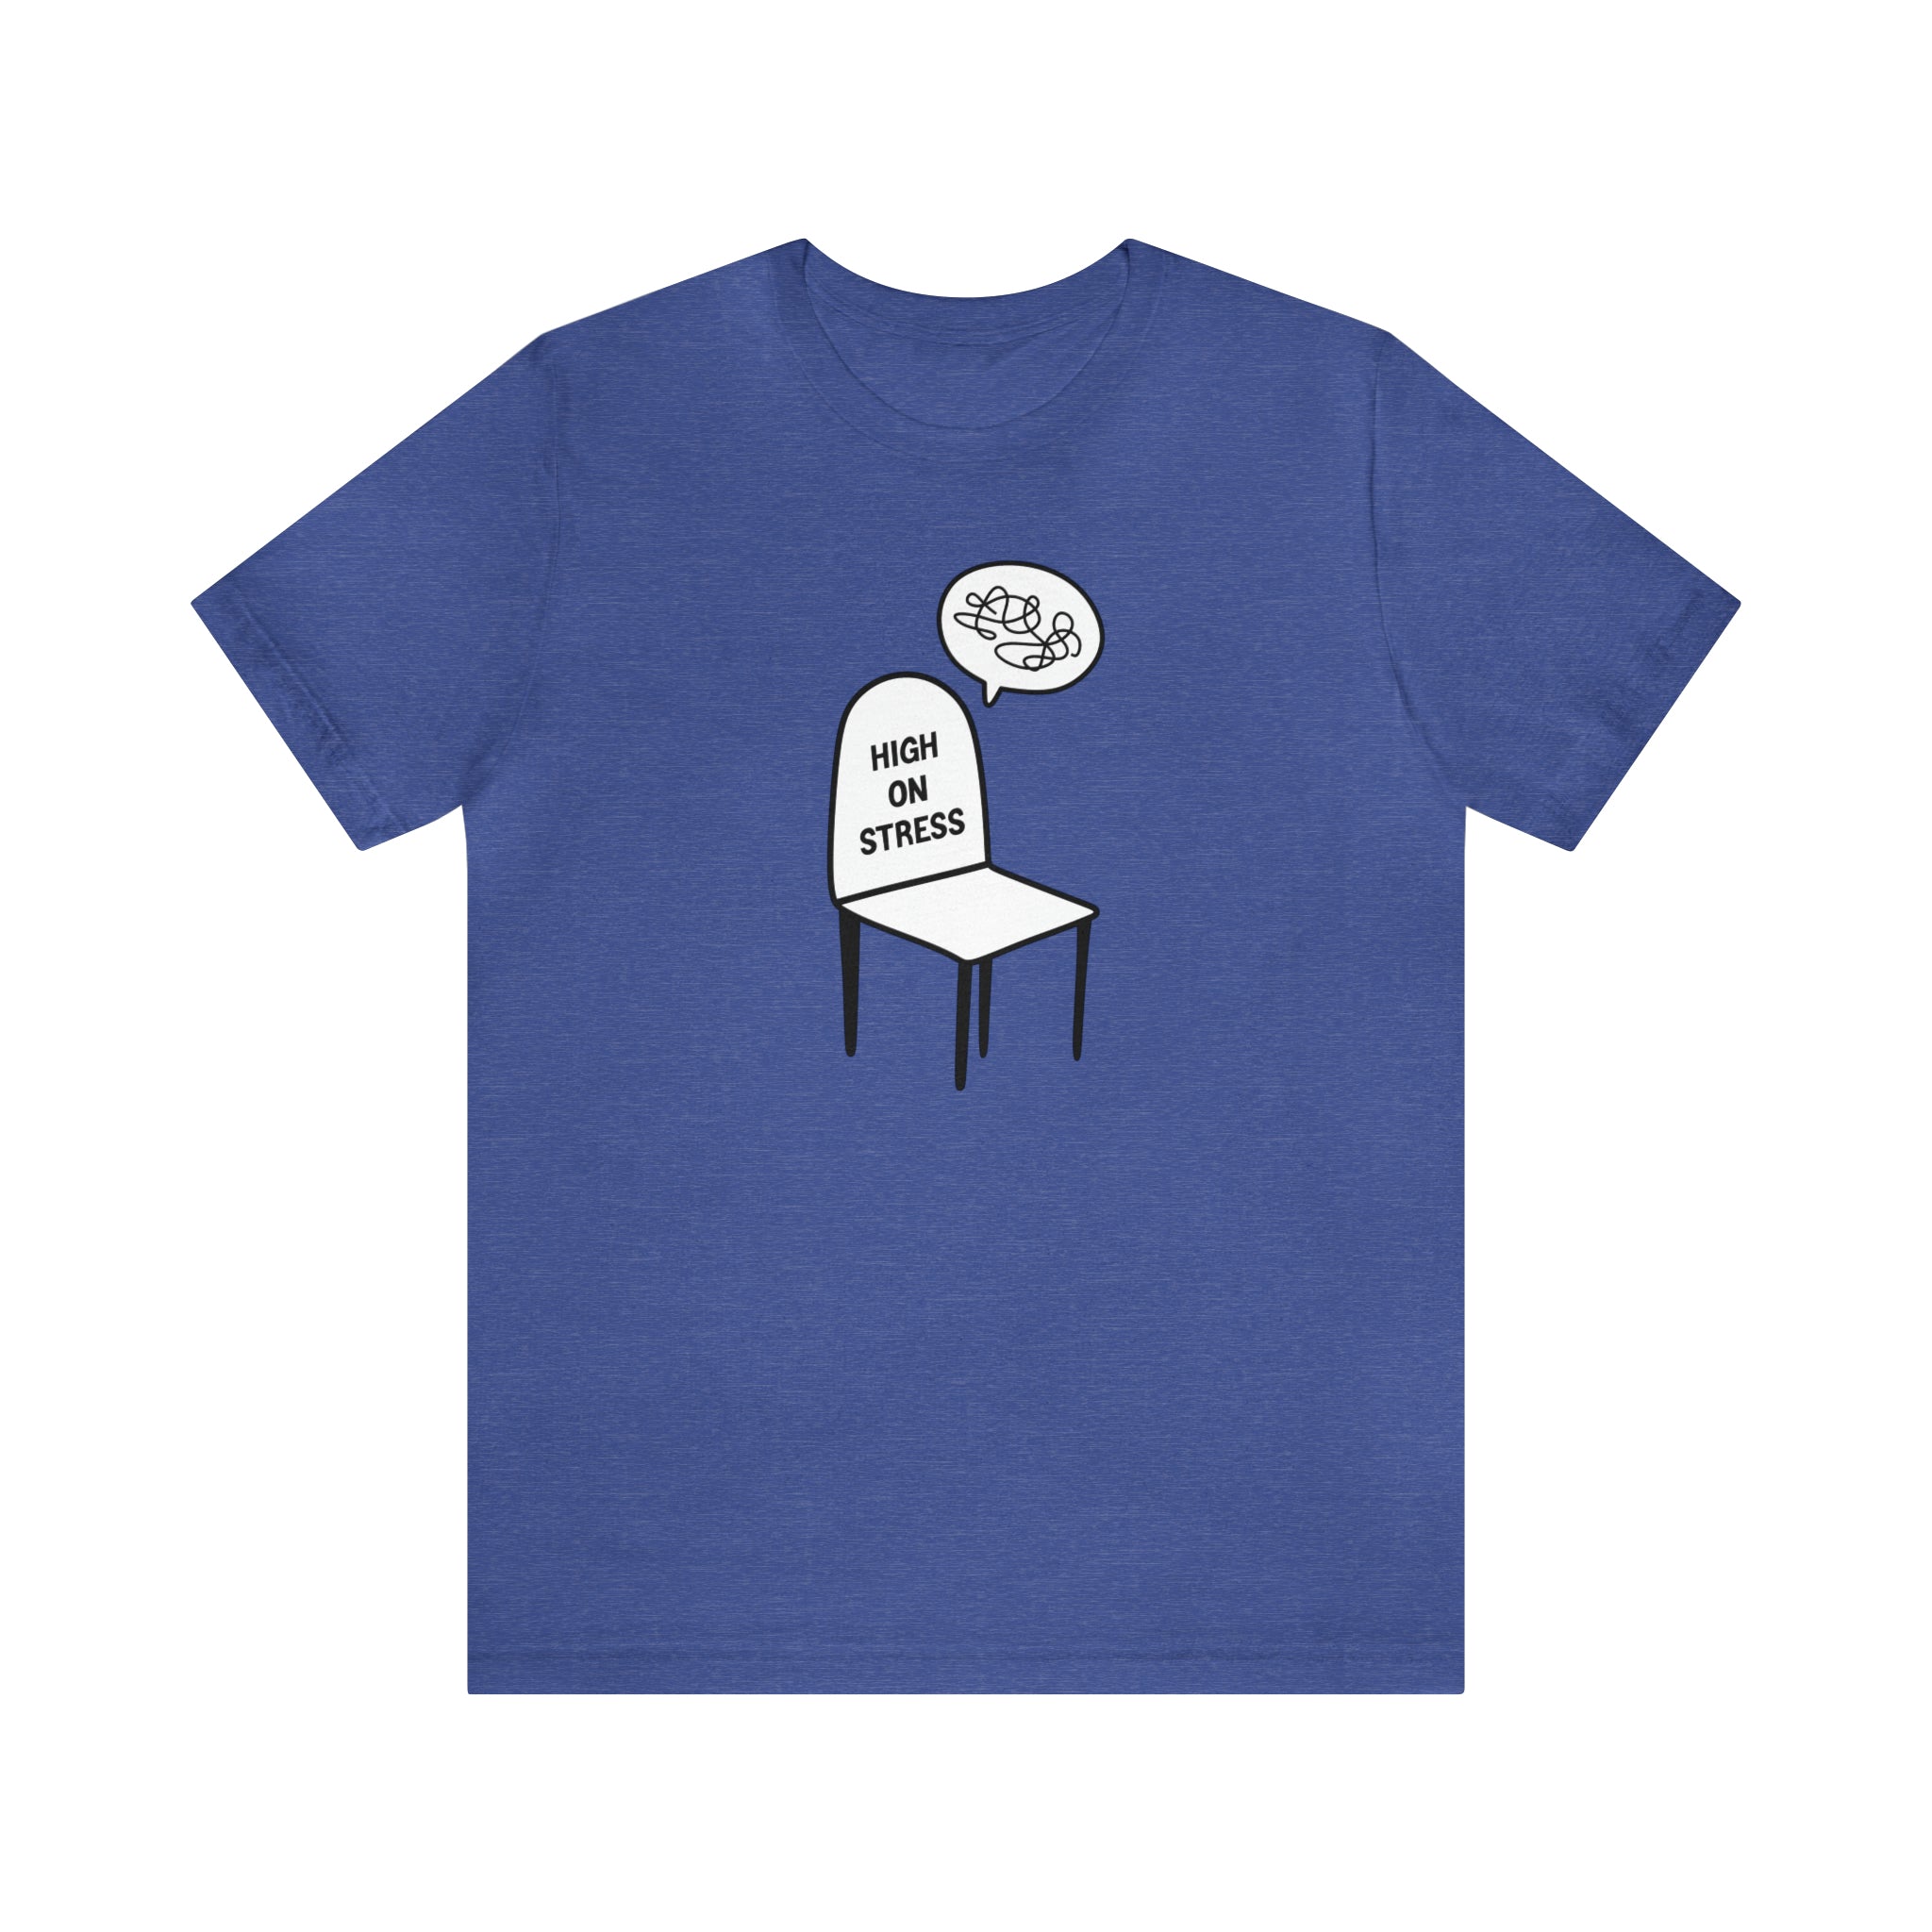 A cool as a cucumber High on Stress T-Shirt with an image of a chair and a speech bubble made of comfy cotton classic fabric.